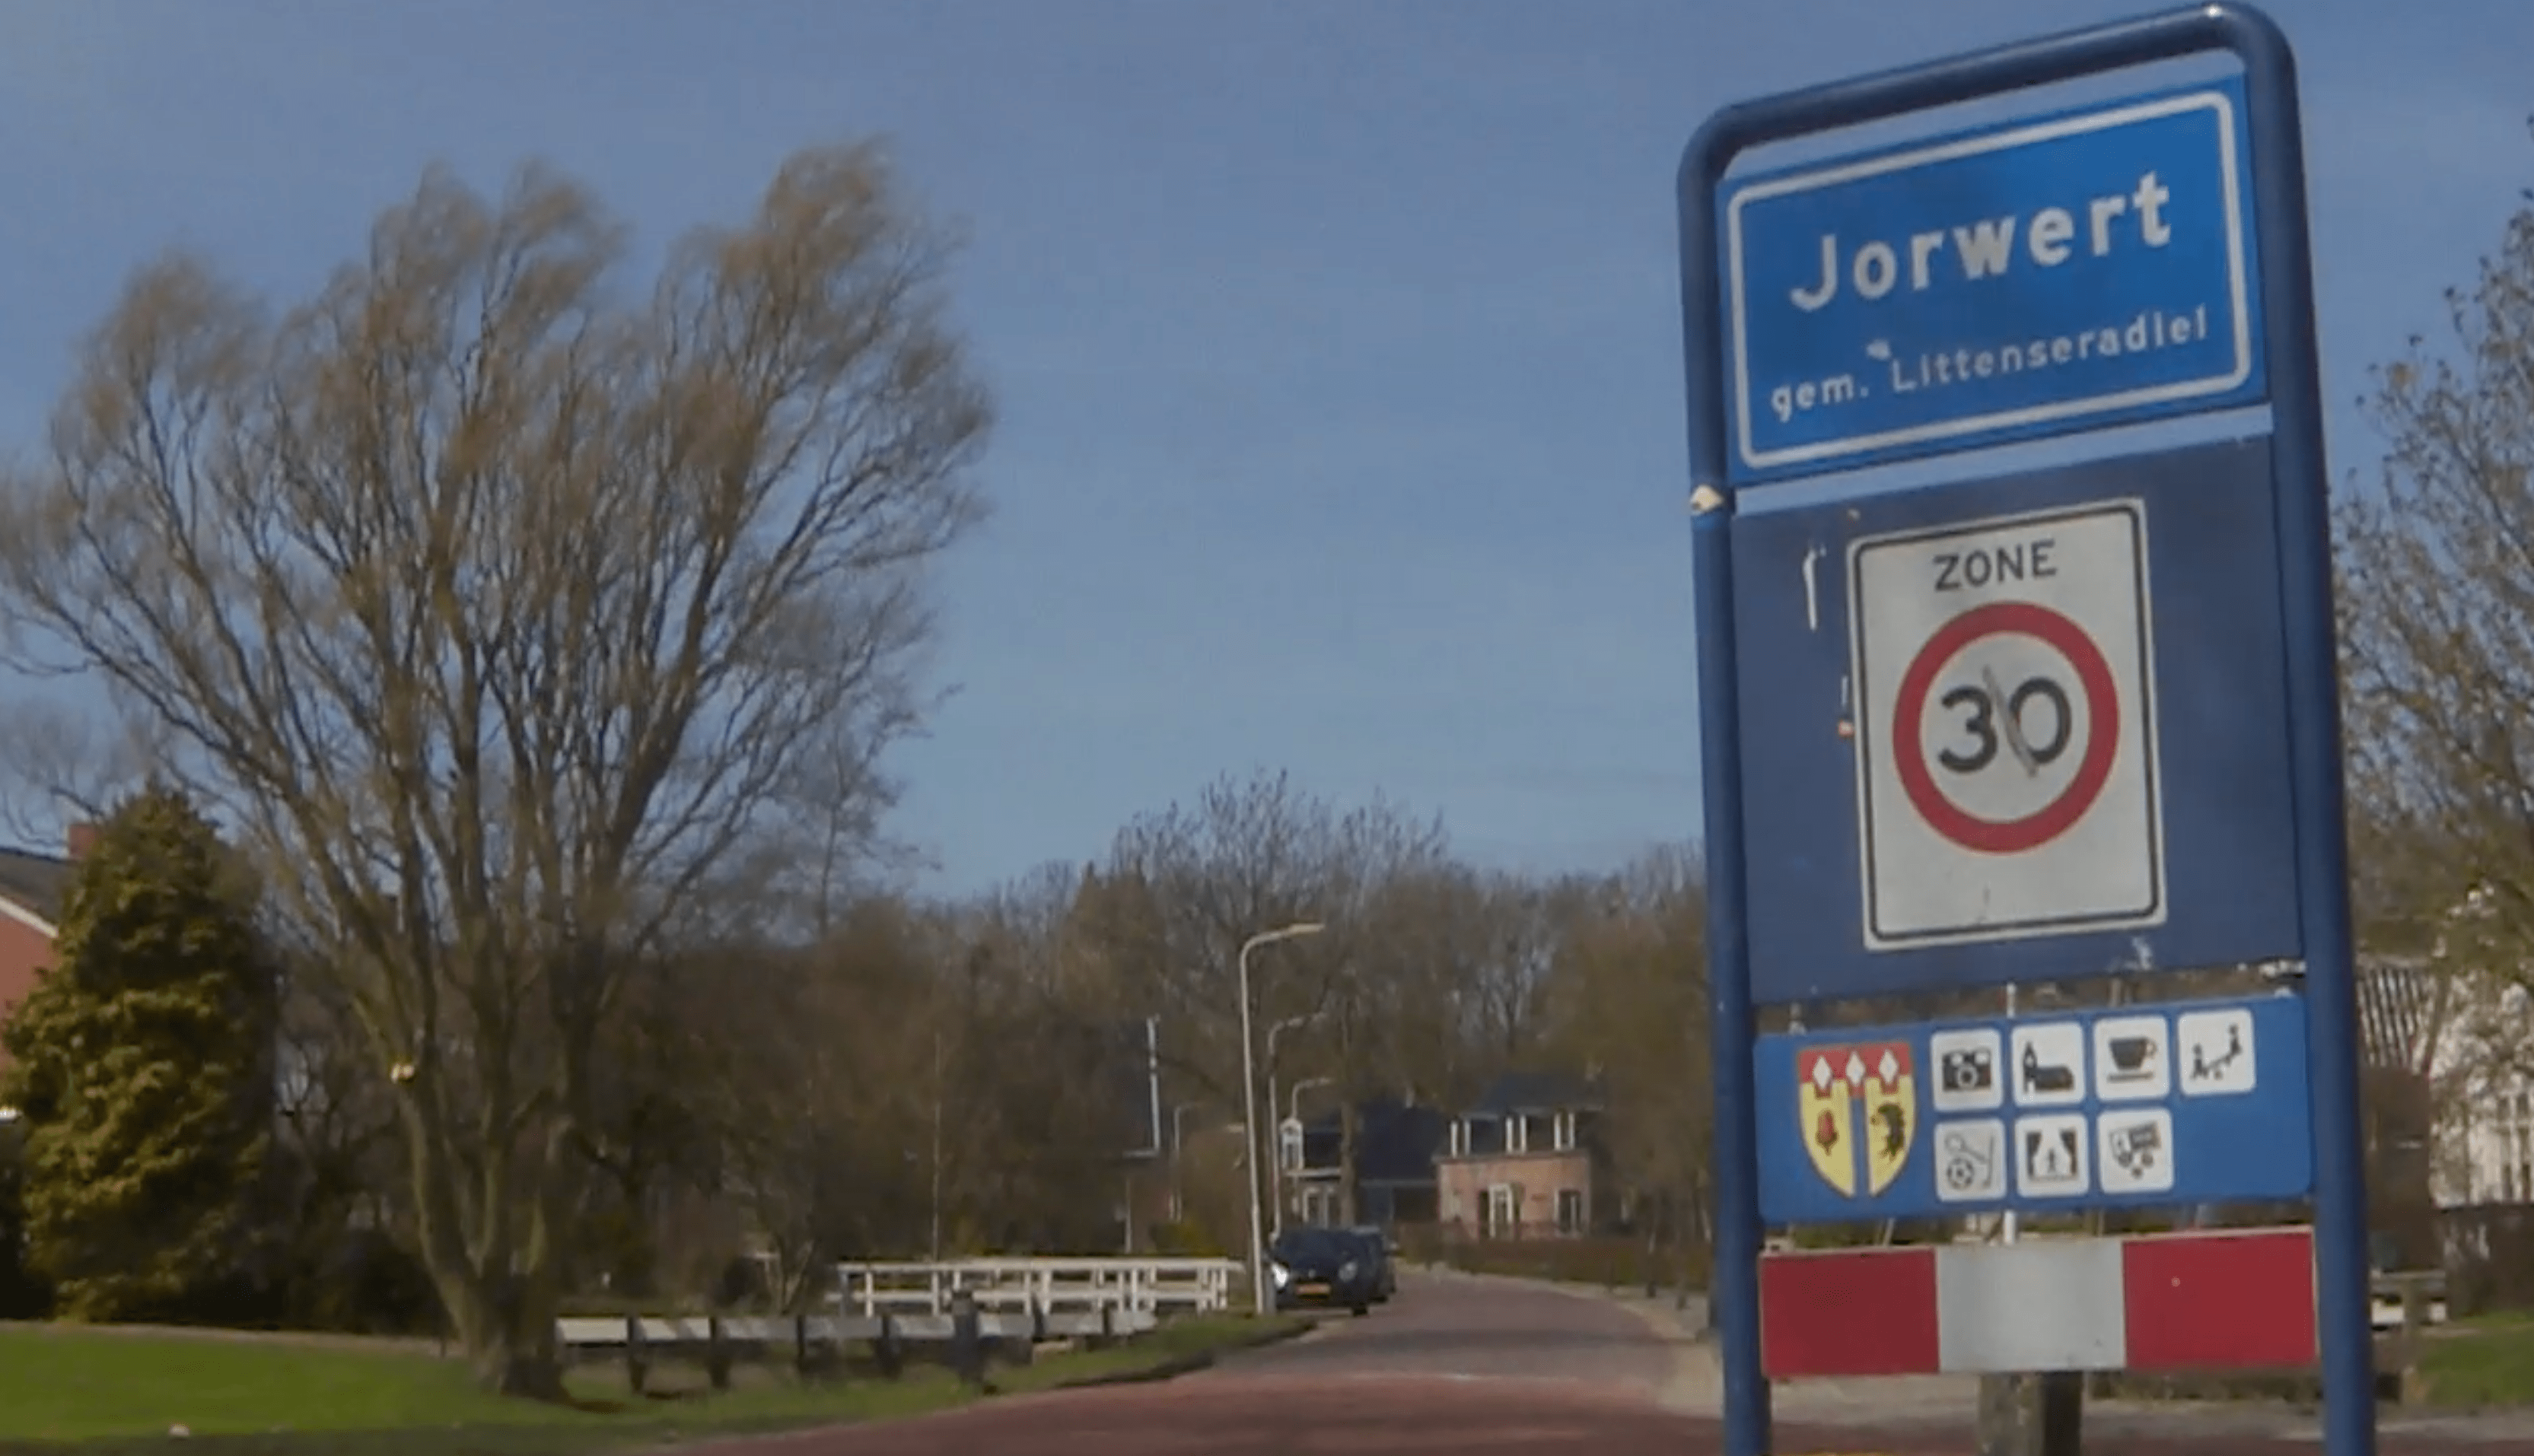 How transport poverty becomes tangible in Jorwerd